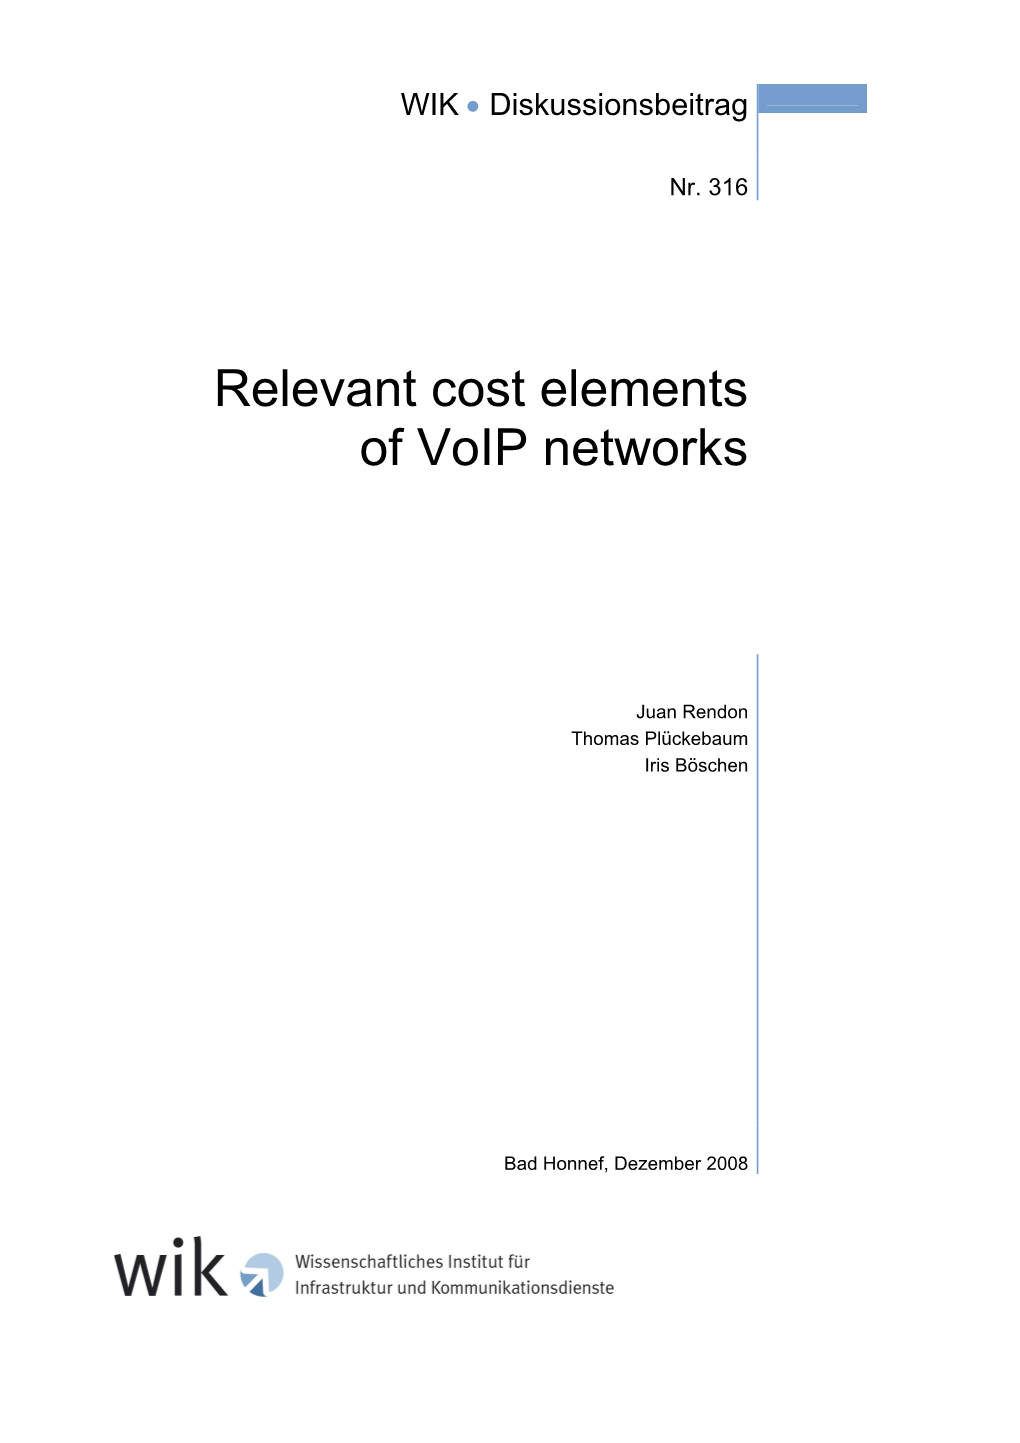 Relevant Cost Elements of Voip Networks